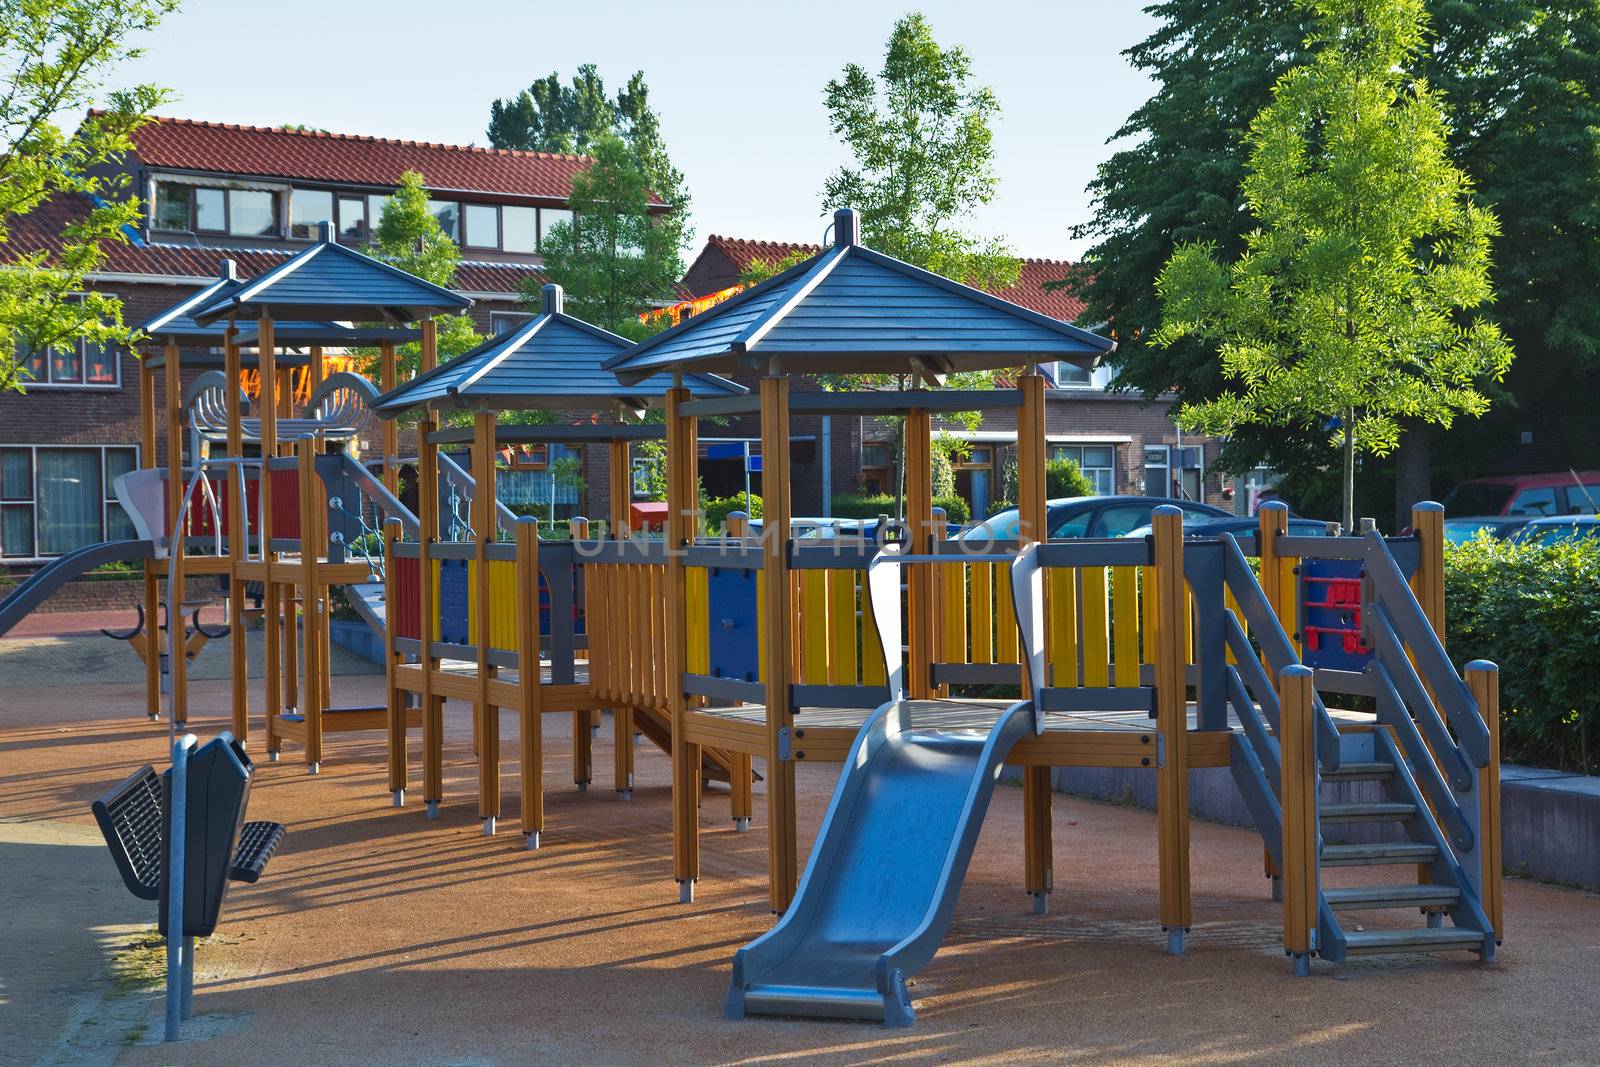 Public playground with colorful wooden climbing construction, swing, slides and rubber floor for safe playing